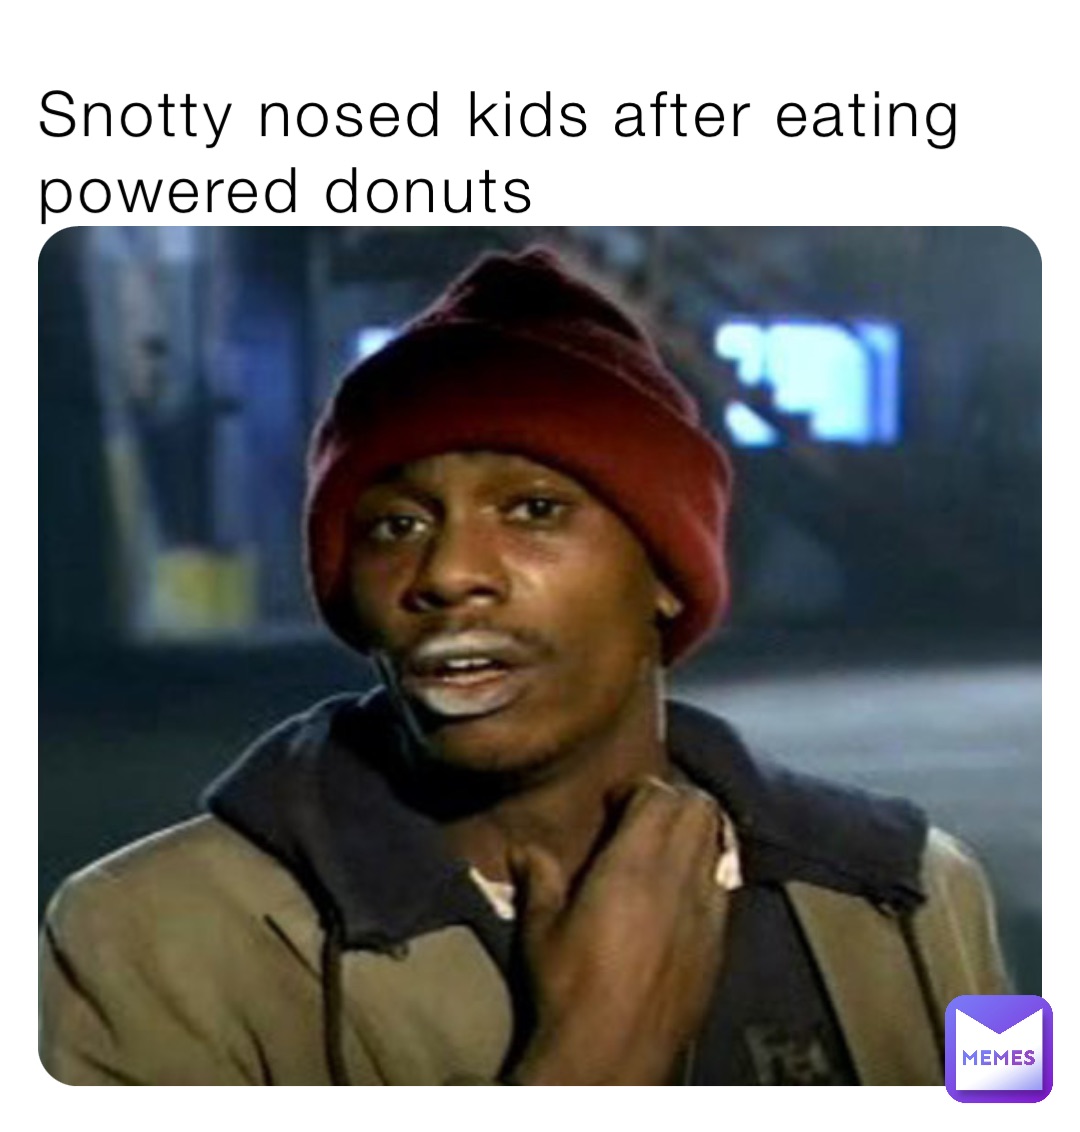 Snotty nosed kids after eating powered donuts